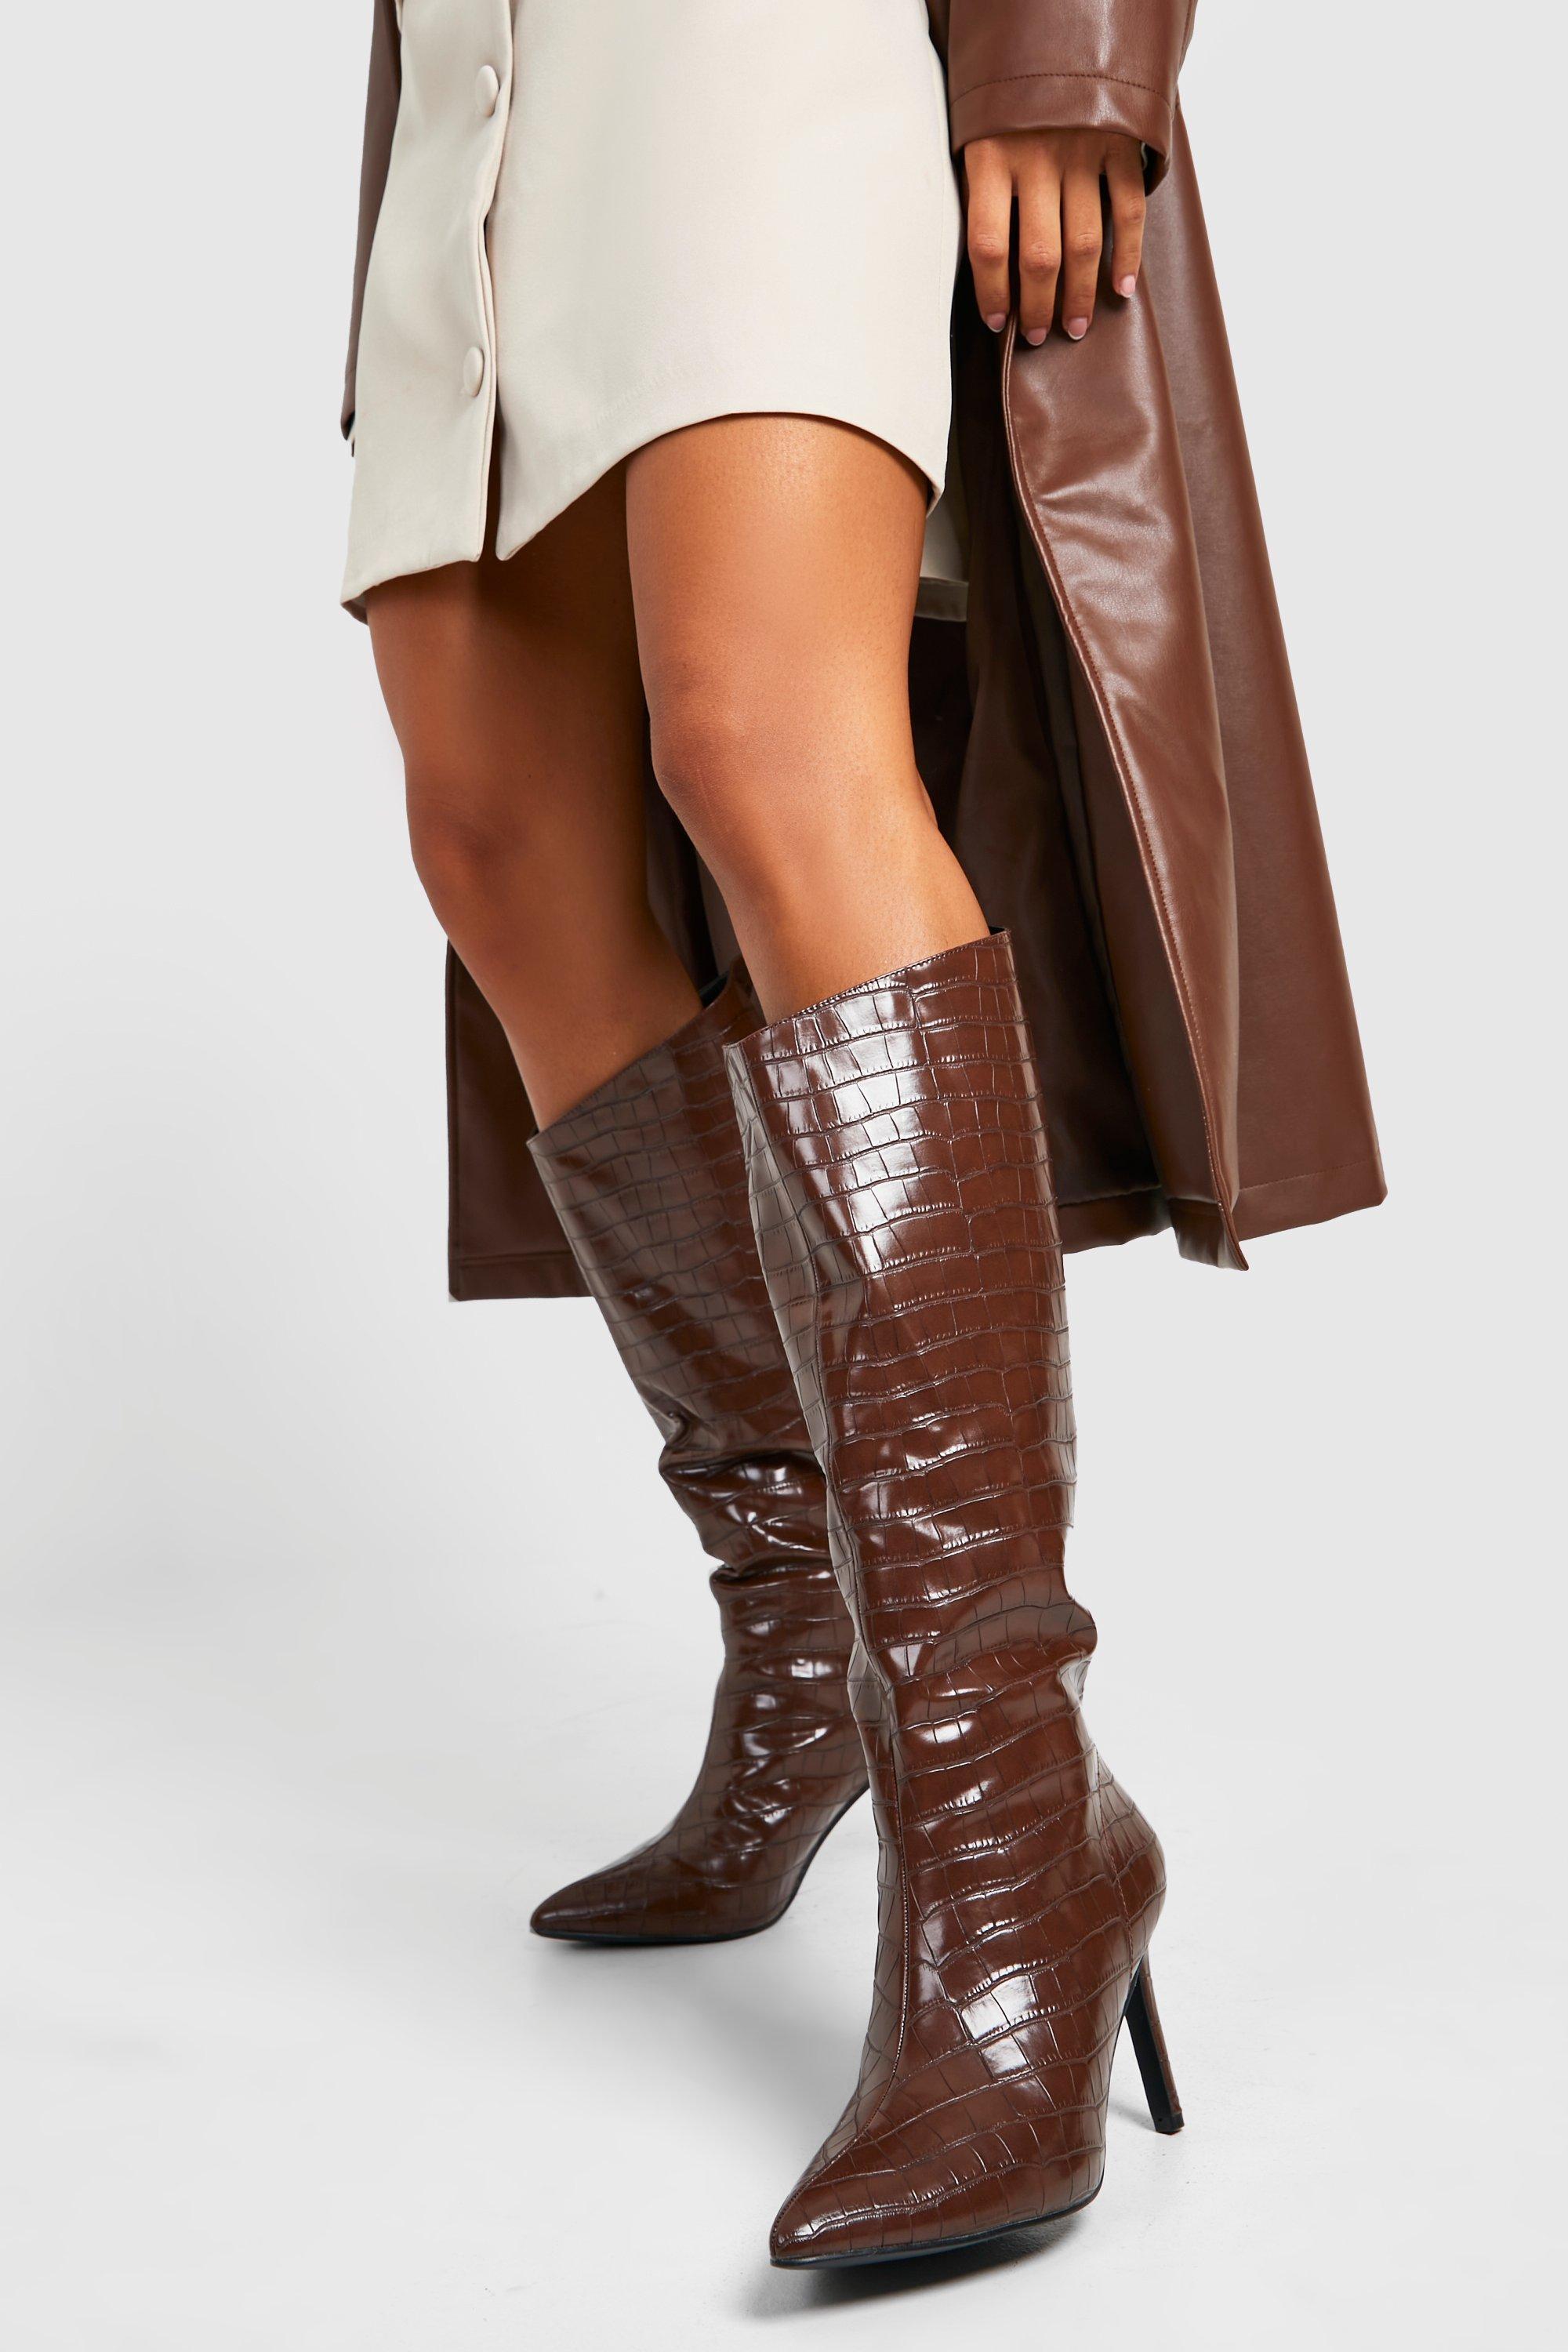 Boohoo Croc Asymmetric Pointed Toe Knee High Boots in Brown | Lyst